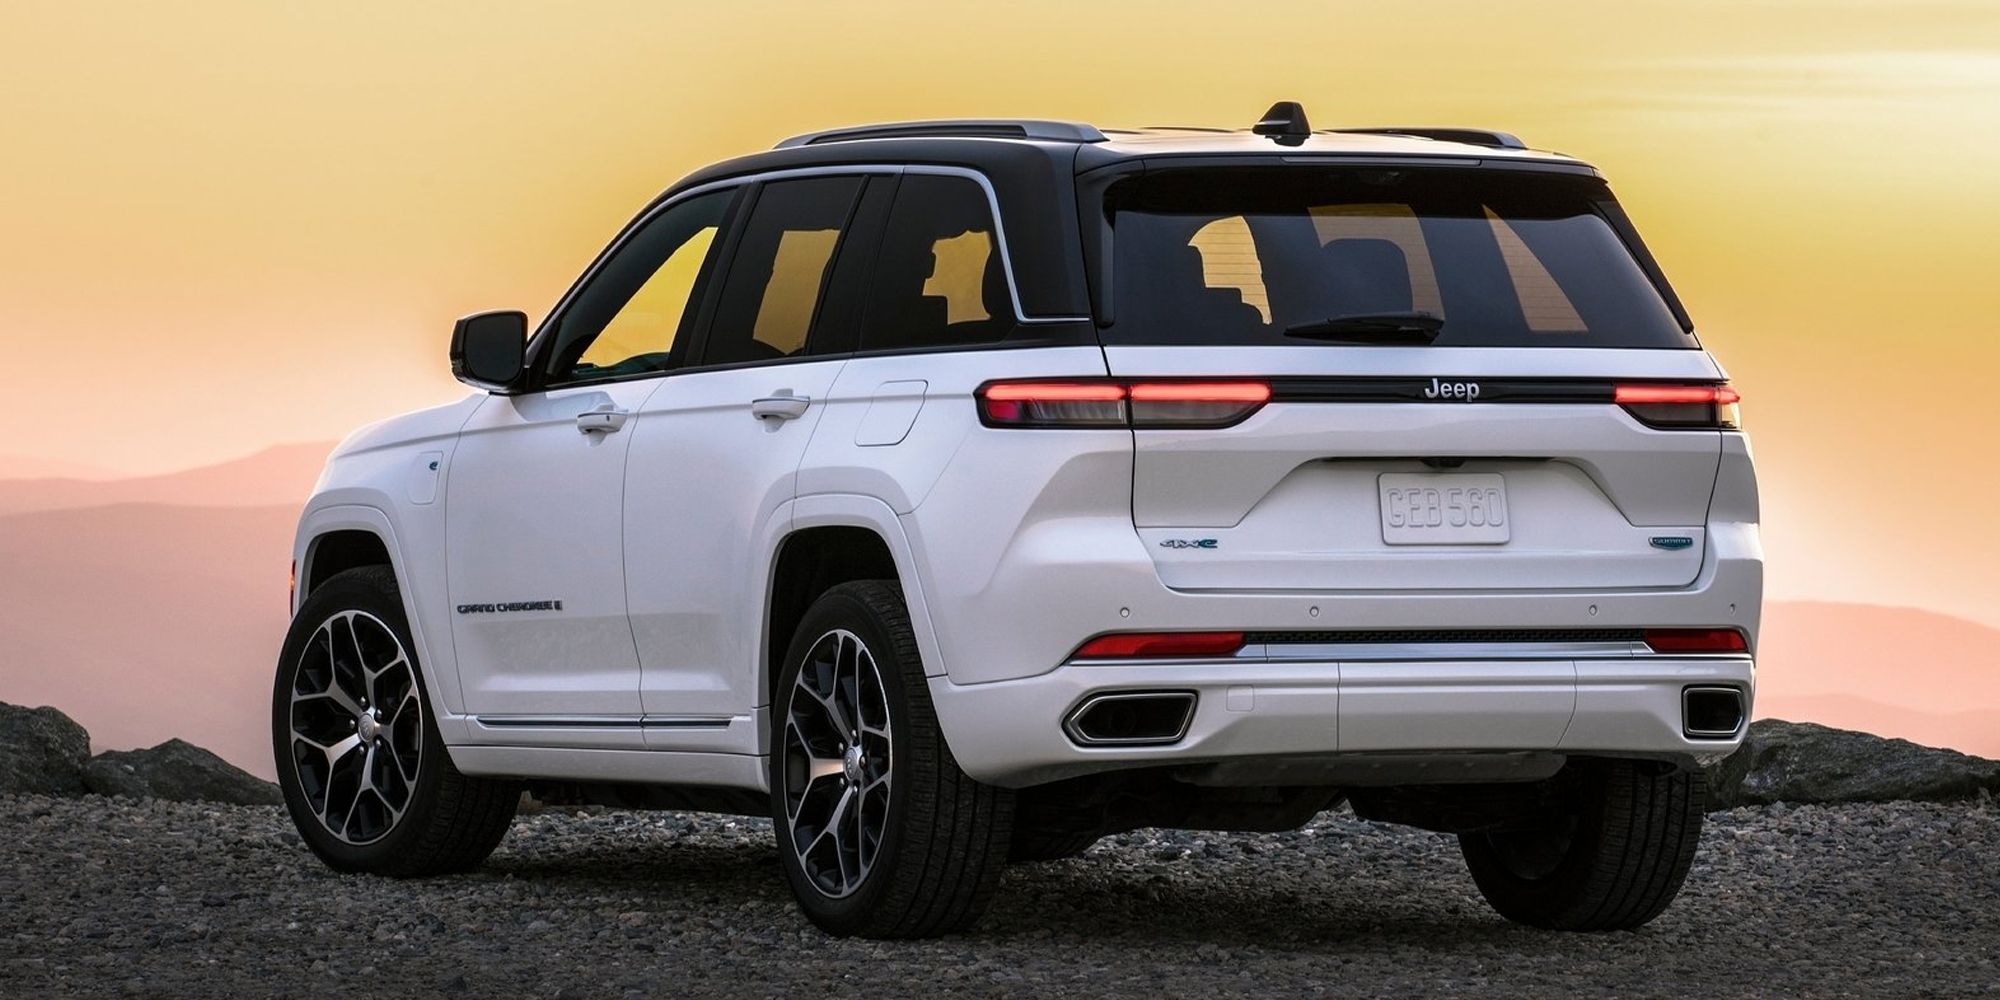 The rear of a white Grand Cherokee